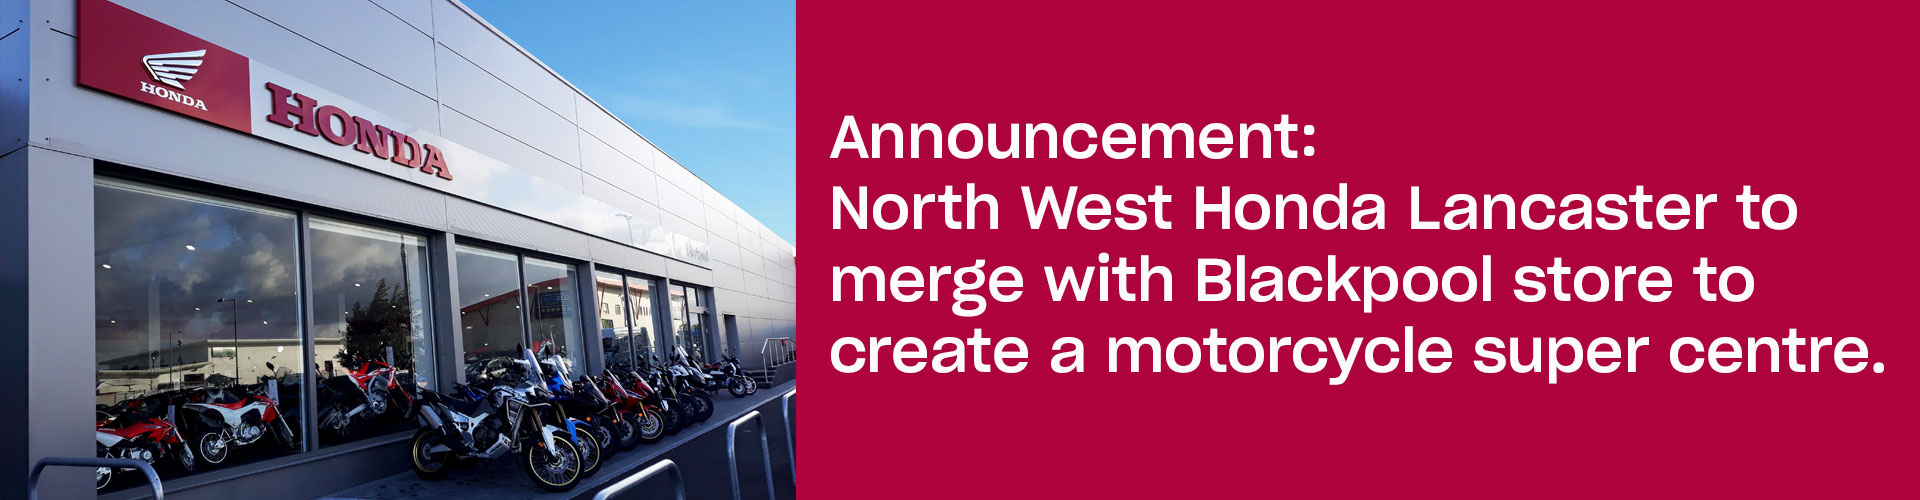 North West Honda Lancaster to merge with Blackpool store to create a motorcycle super centre